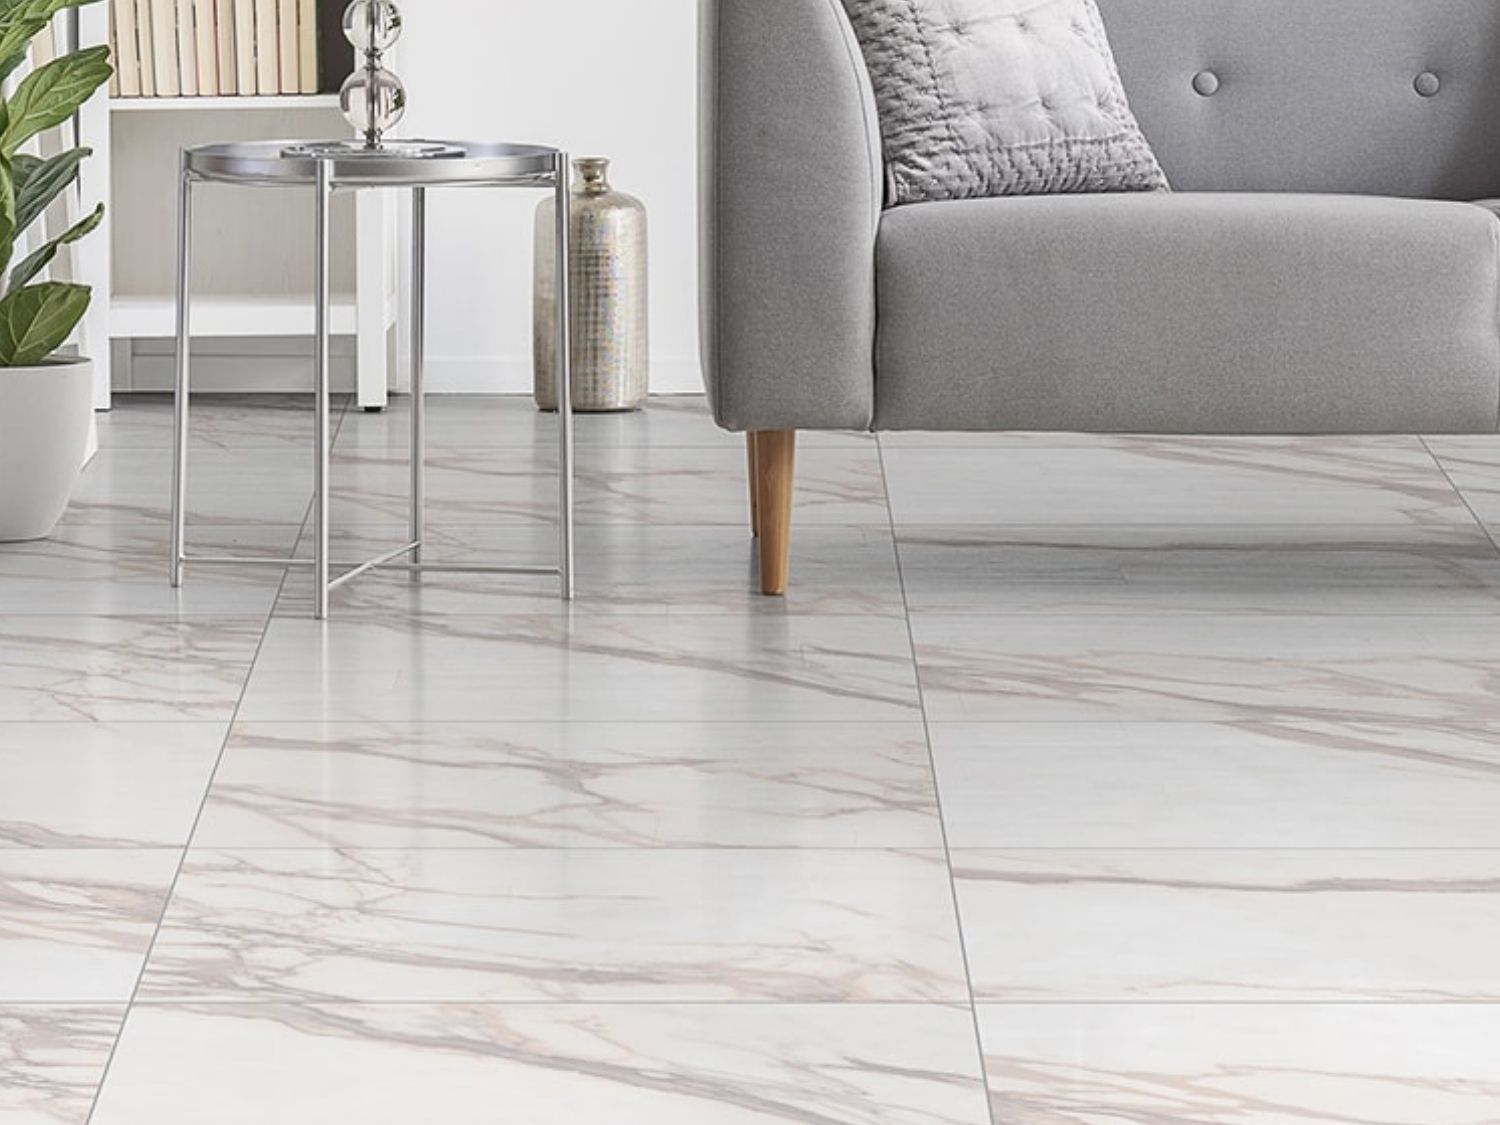 Ceramic floor tile with motifs as an alternative for marble and granite tile